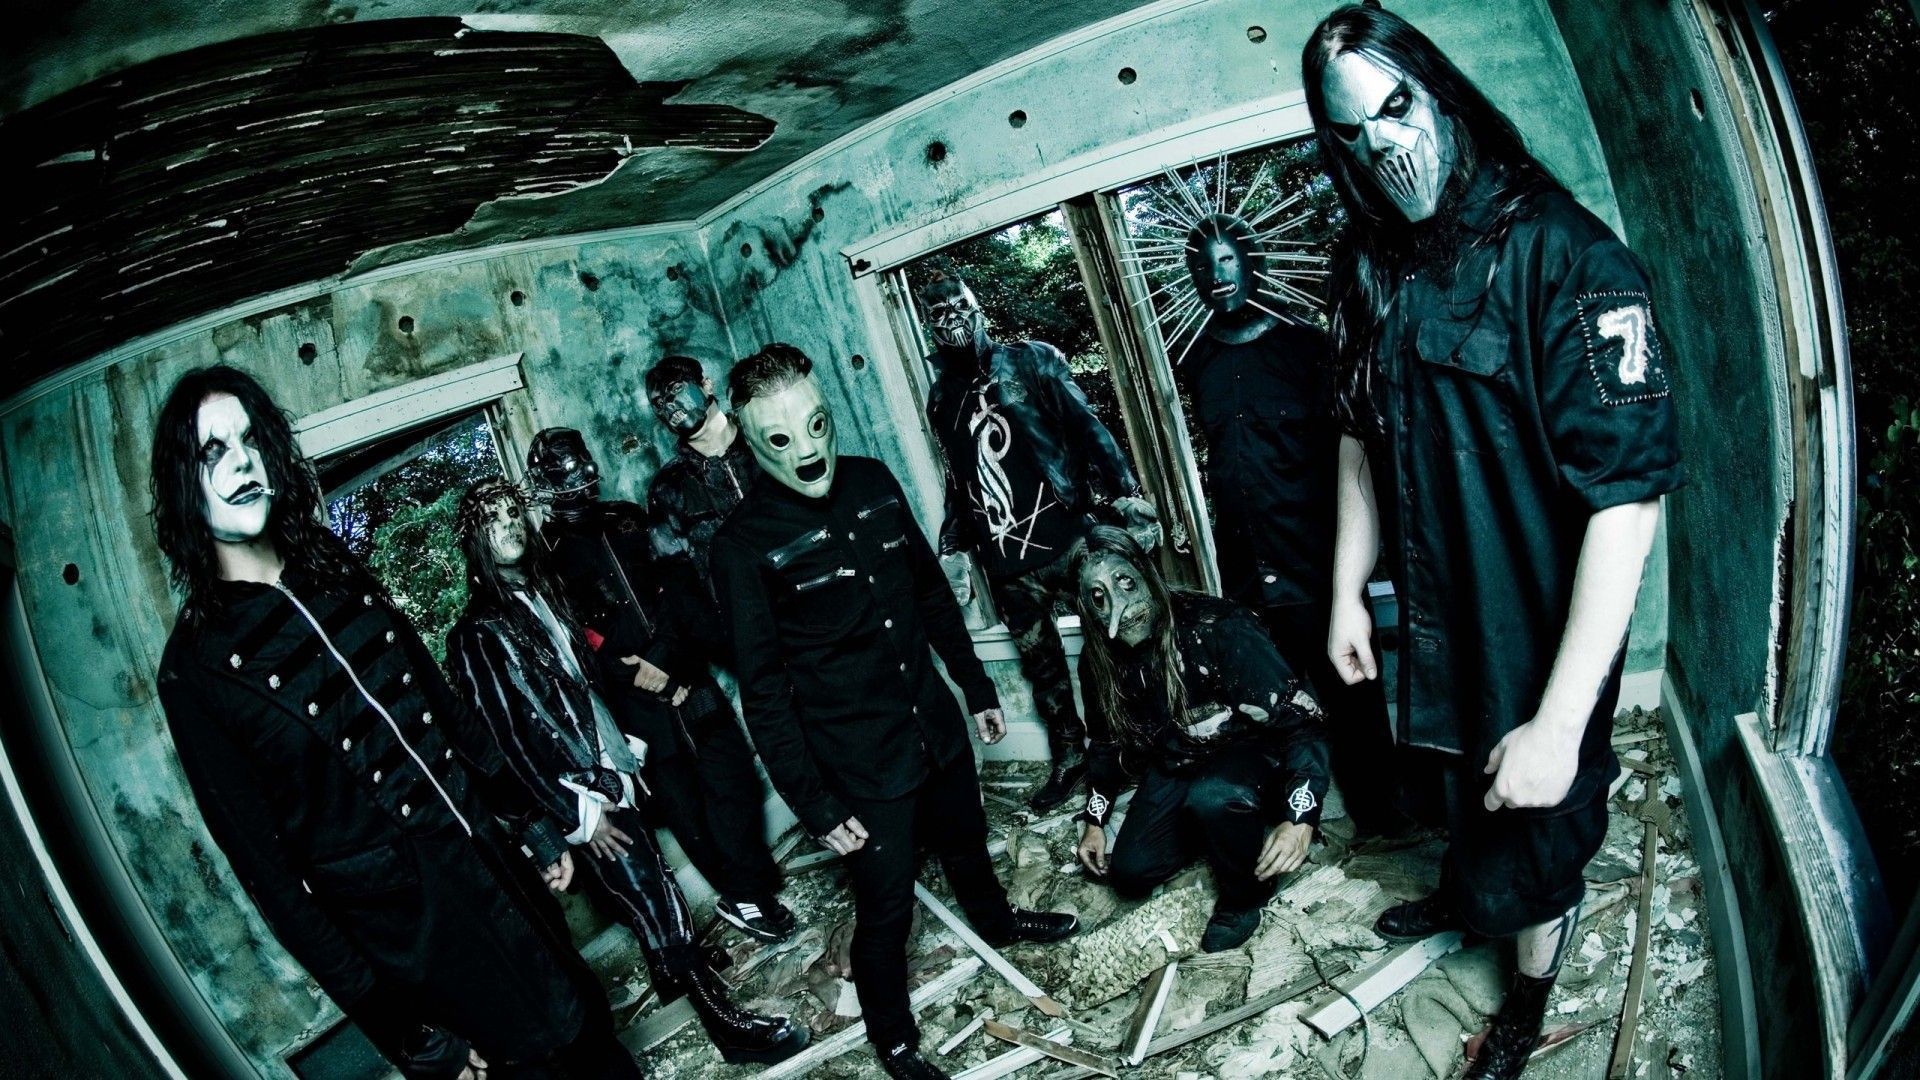 Metal music bands slipknot best widescreen background awesome